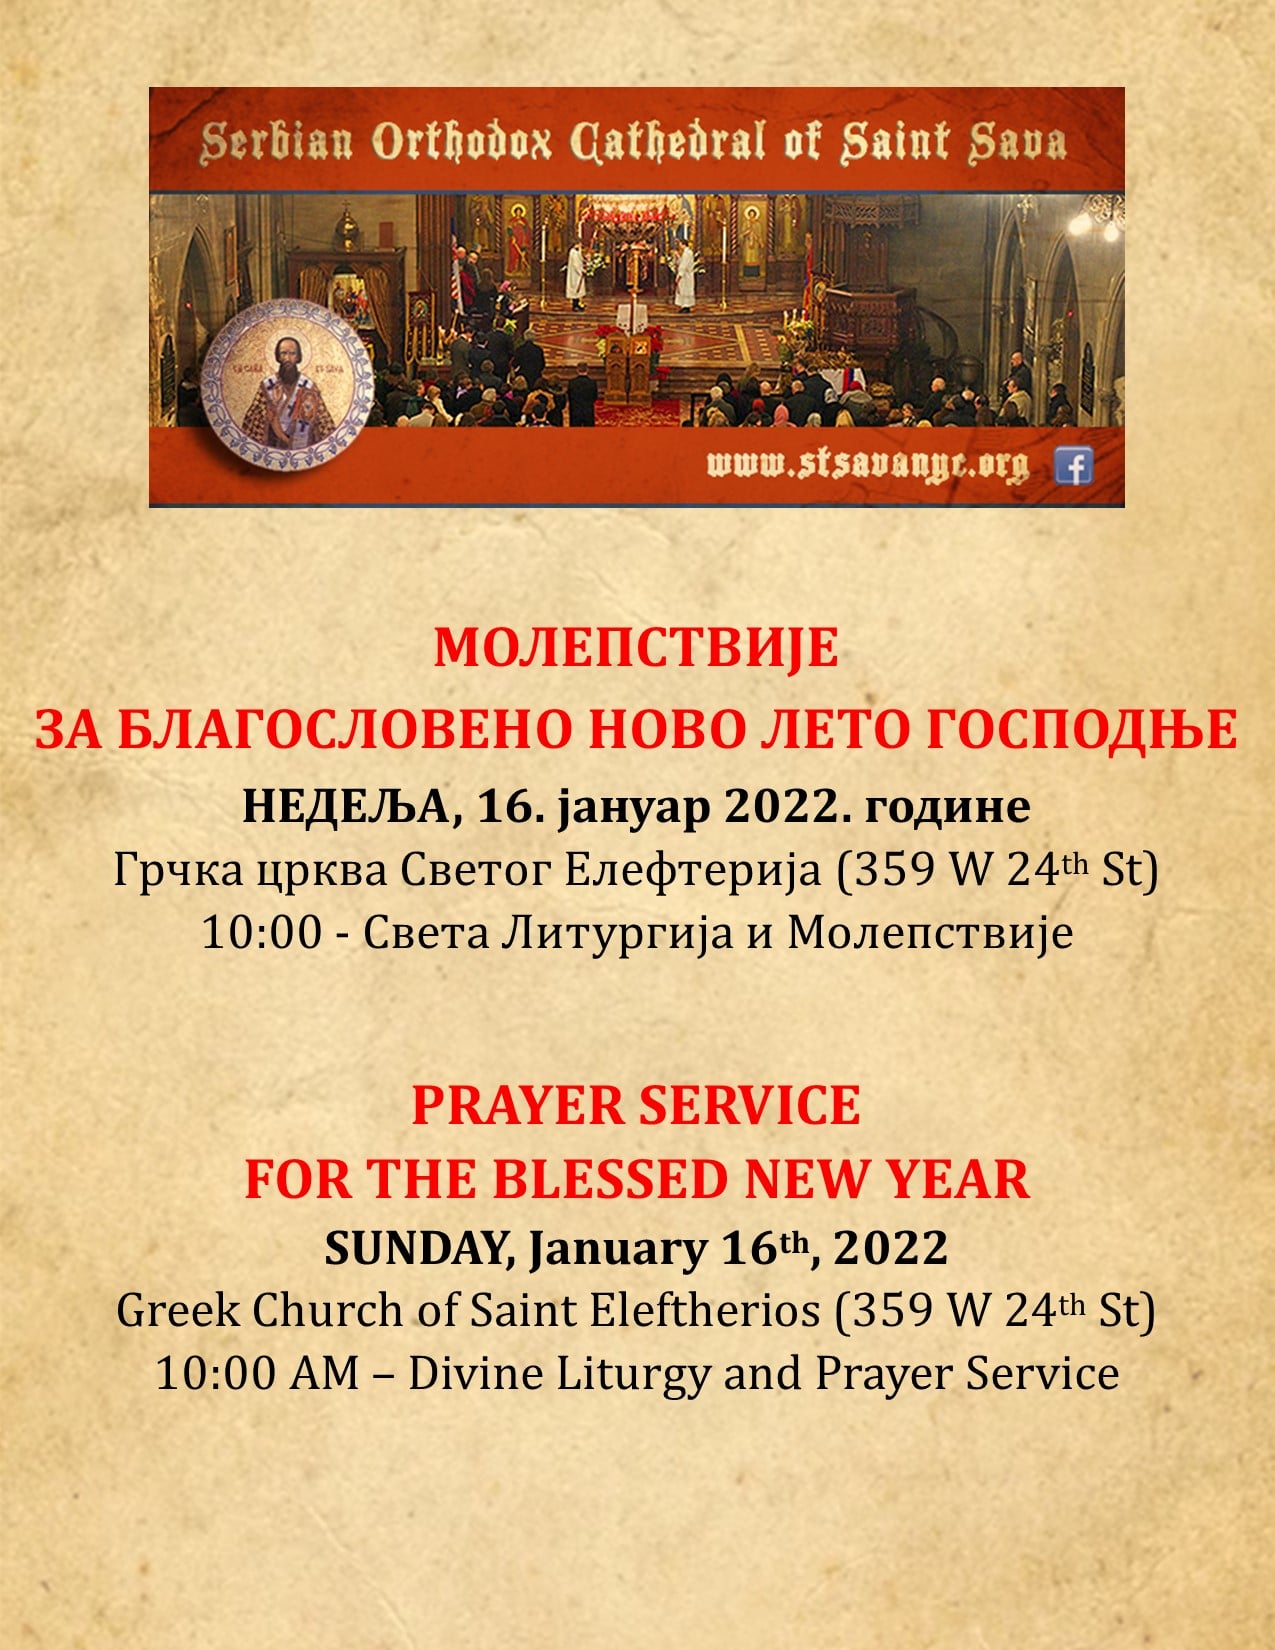 PRAYER SERVICE FOR THE BLESSED NEW YEAR